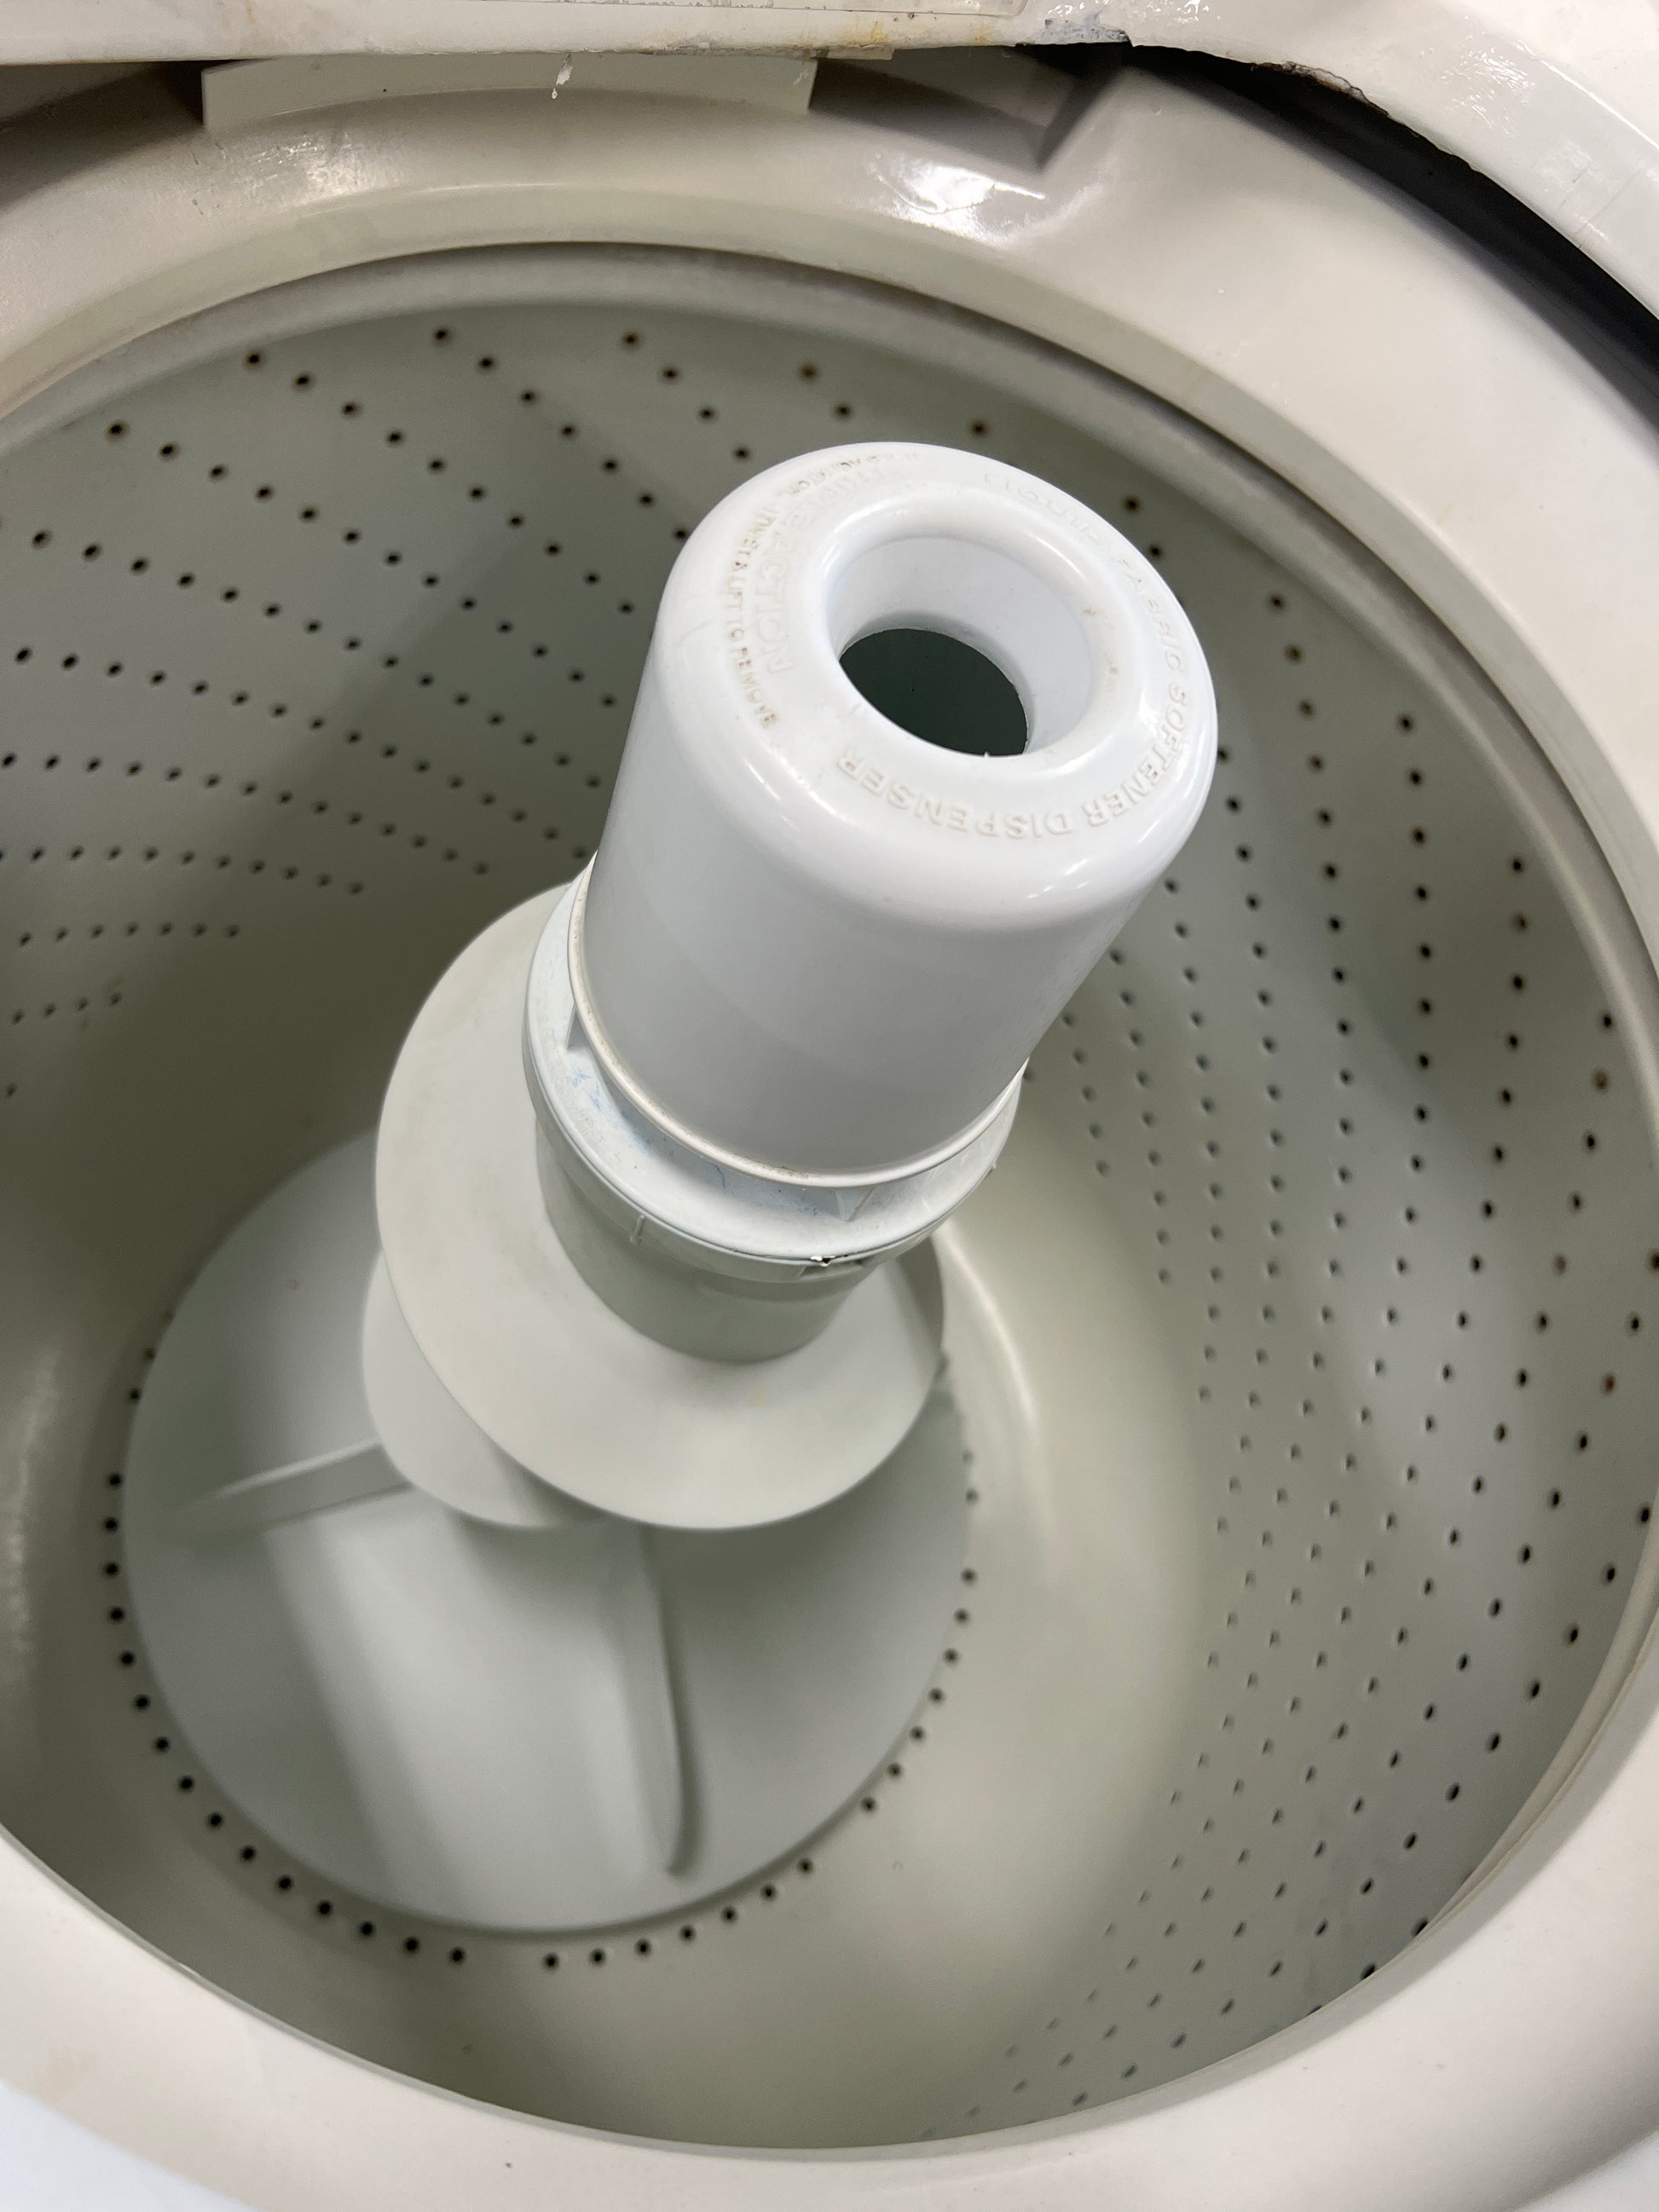 Kenmore Heavy Duty 80 Series Washer/Dryer. Not a single repair in 33 years.  No complicated Electronics. Cheap Parts. Just a tub of water that agitates  and a heated rotating bin that dries. 